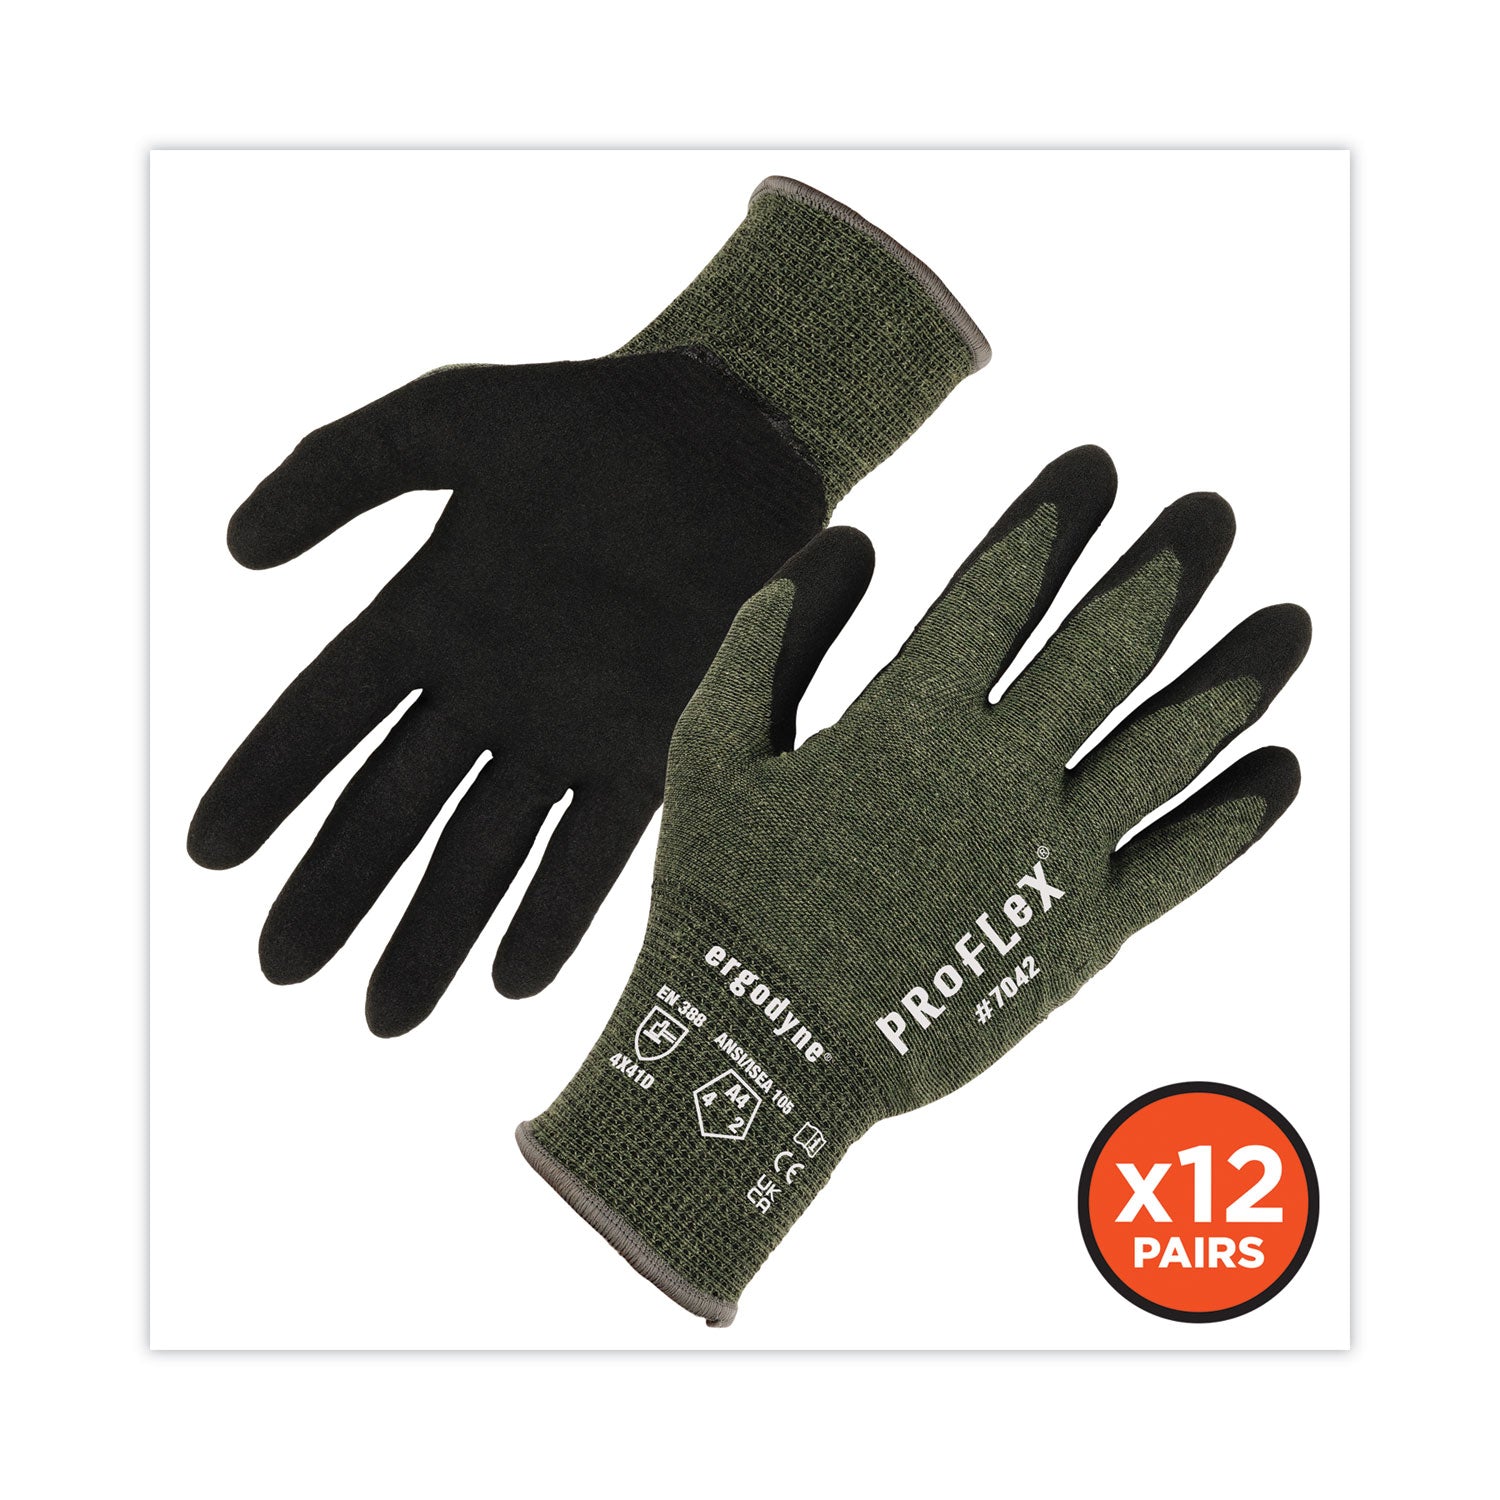 proflex-7042-ansi-a4-nitrile-coated-cr-gloves-green-x-large-12-pairs-pack-ships-in-1-3-business-days_ego10335 - 4